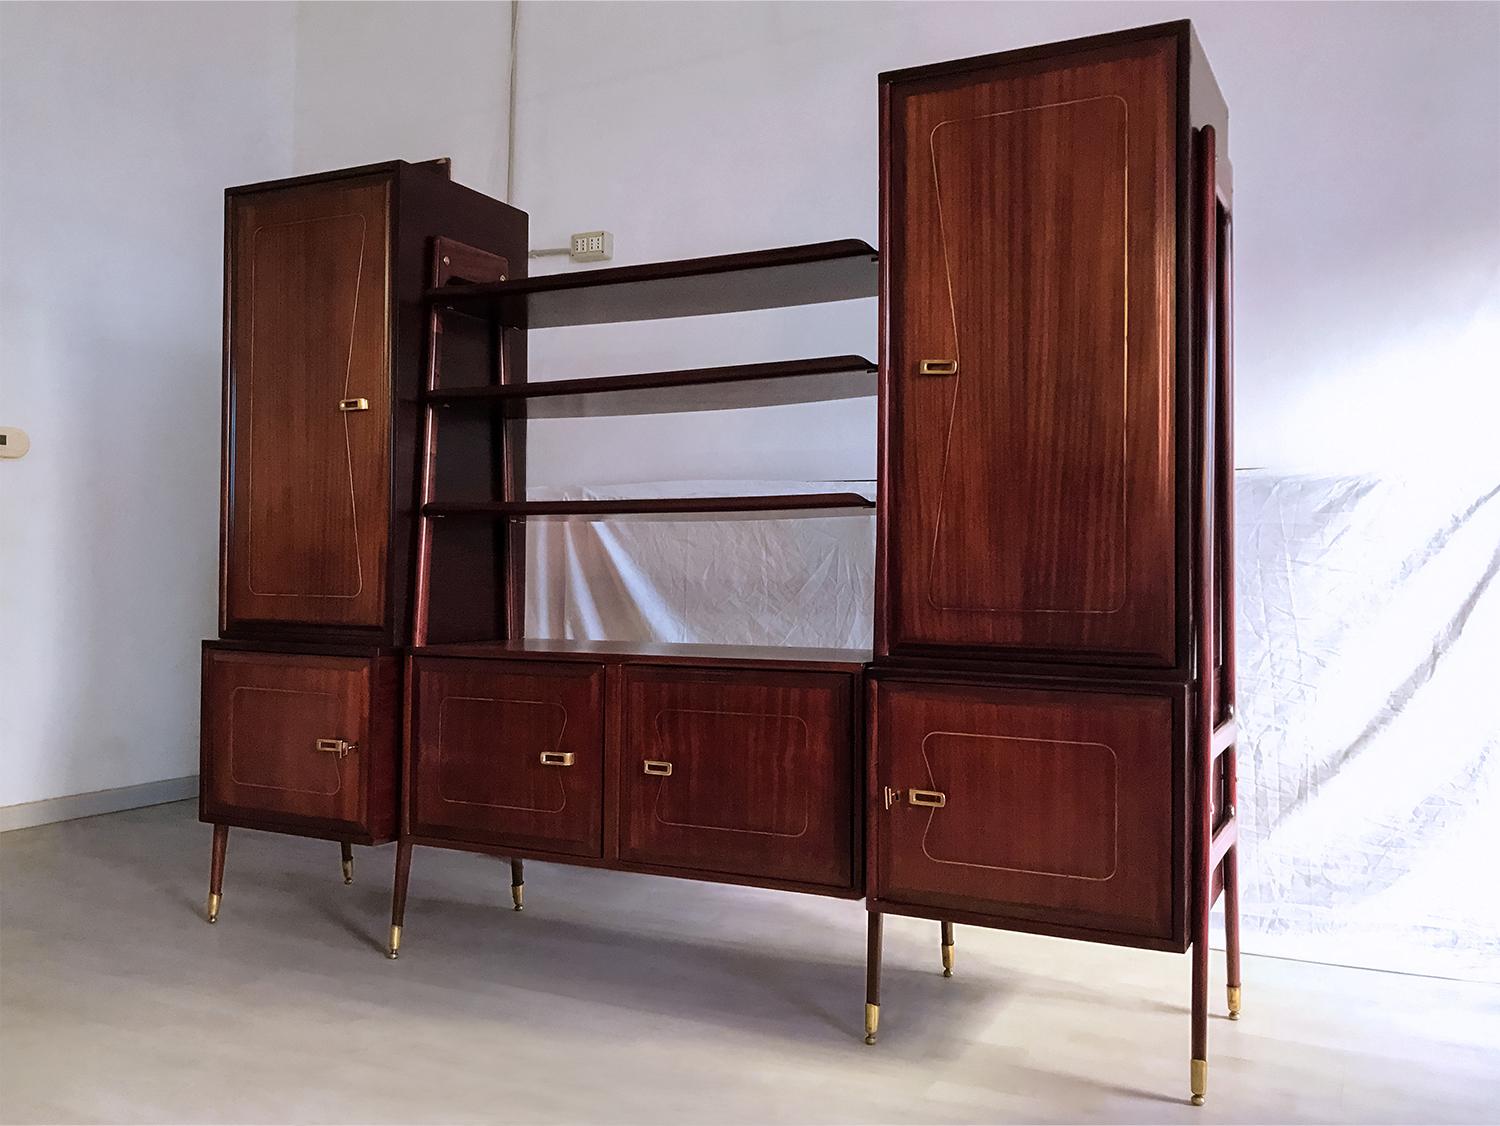 Amazing and unique design for this Italian Bookcase of the 1950s, attributed to La Permanente Mobili Cantù, with structure of mahogany wood veneer finished with brass details.
This Bookcase offers plenty of storage space with its three removable